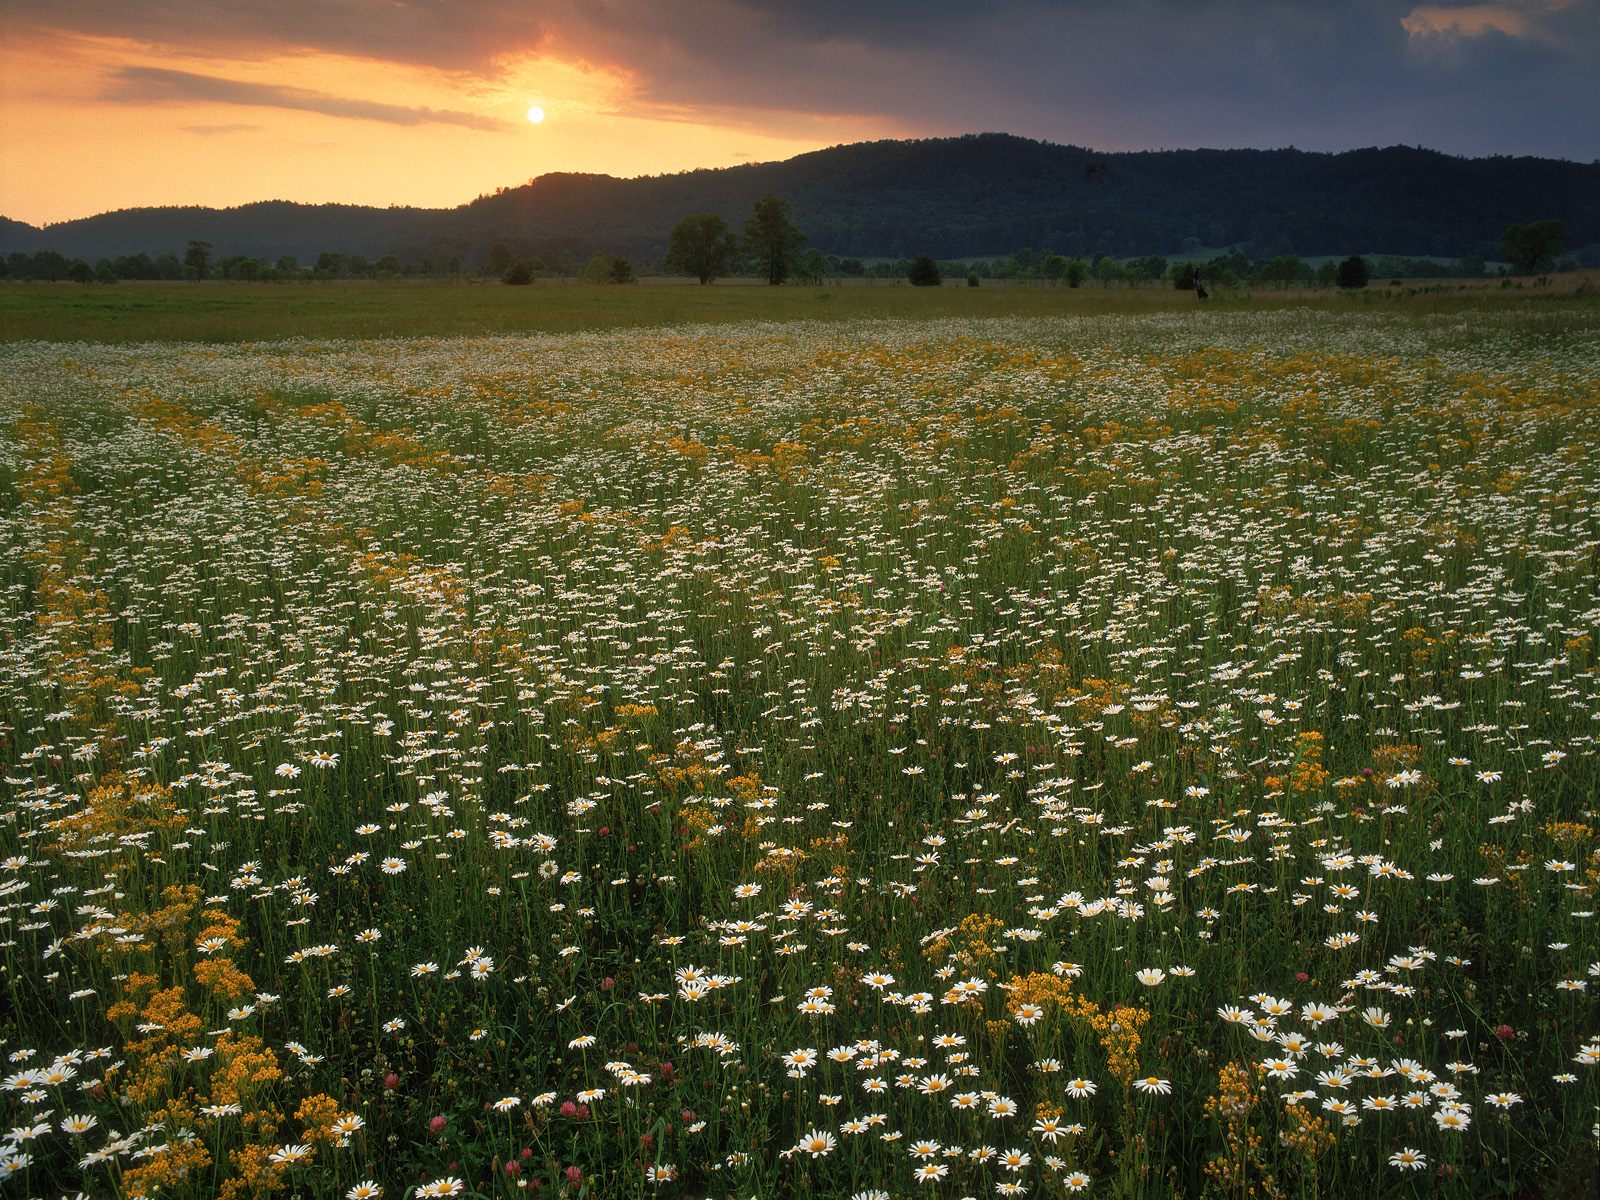 Field of Ox-Eye Daisies, Cades Cove, Great Smoky Mountains National Park, Tennessee